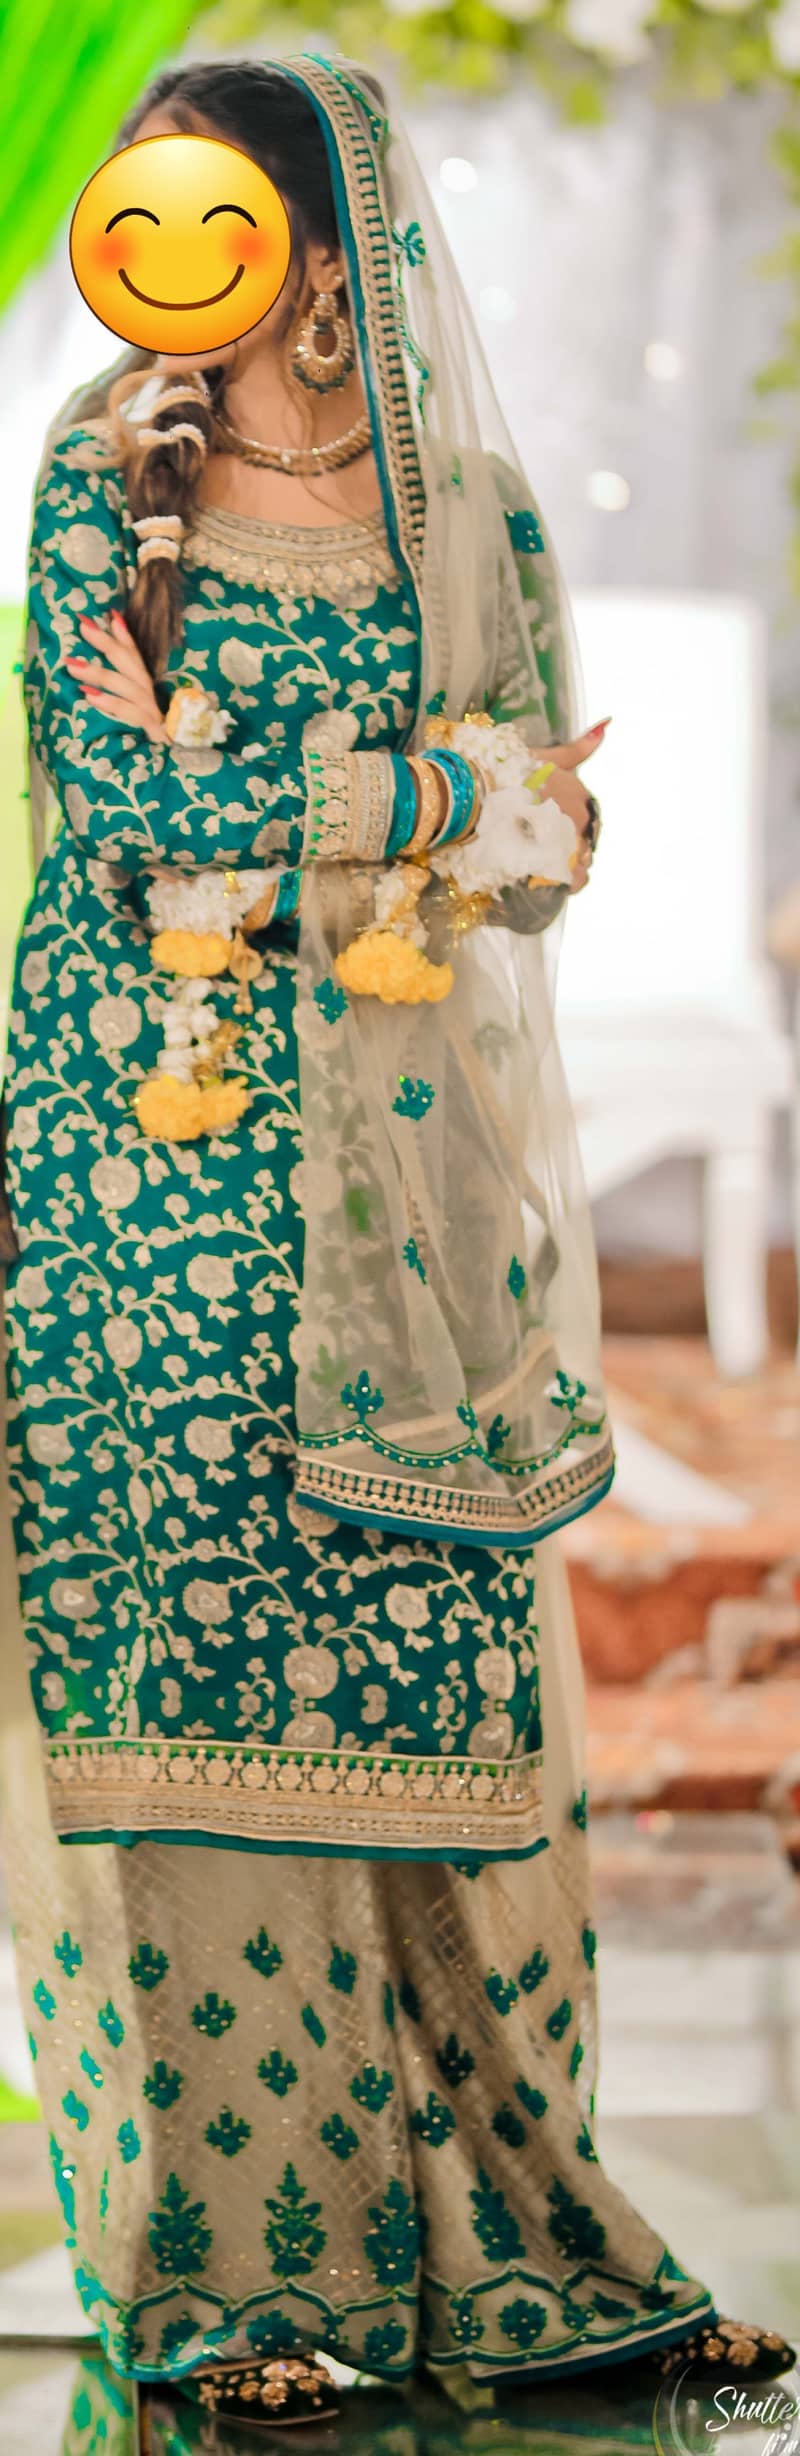 WEDDING COLLECTIONS: 1